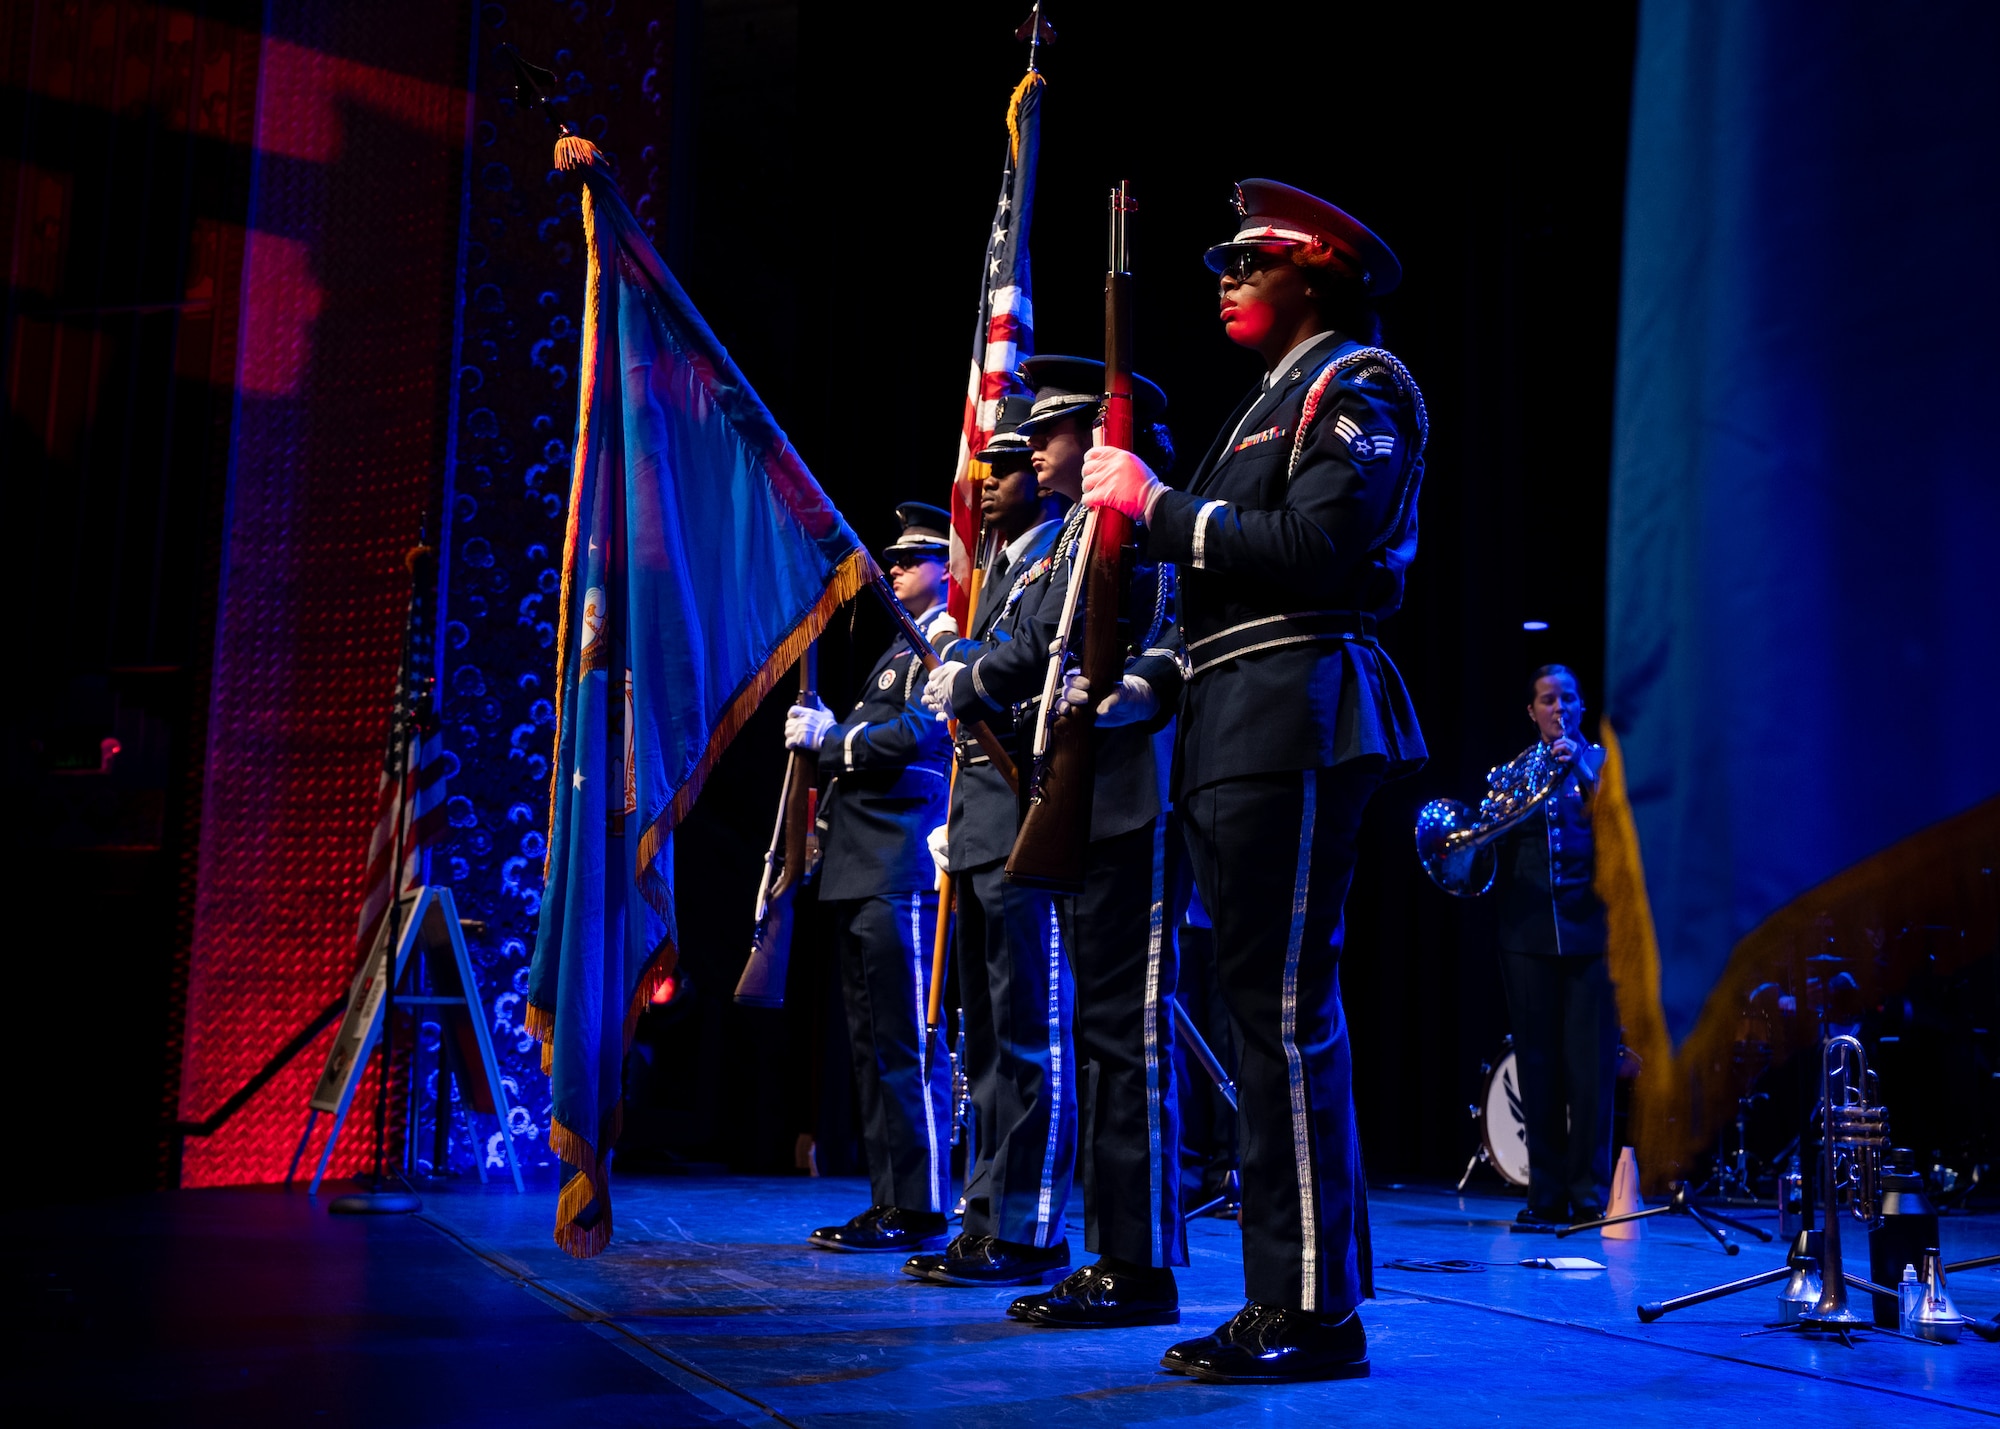 Four honor guardsmen present the colors on stage